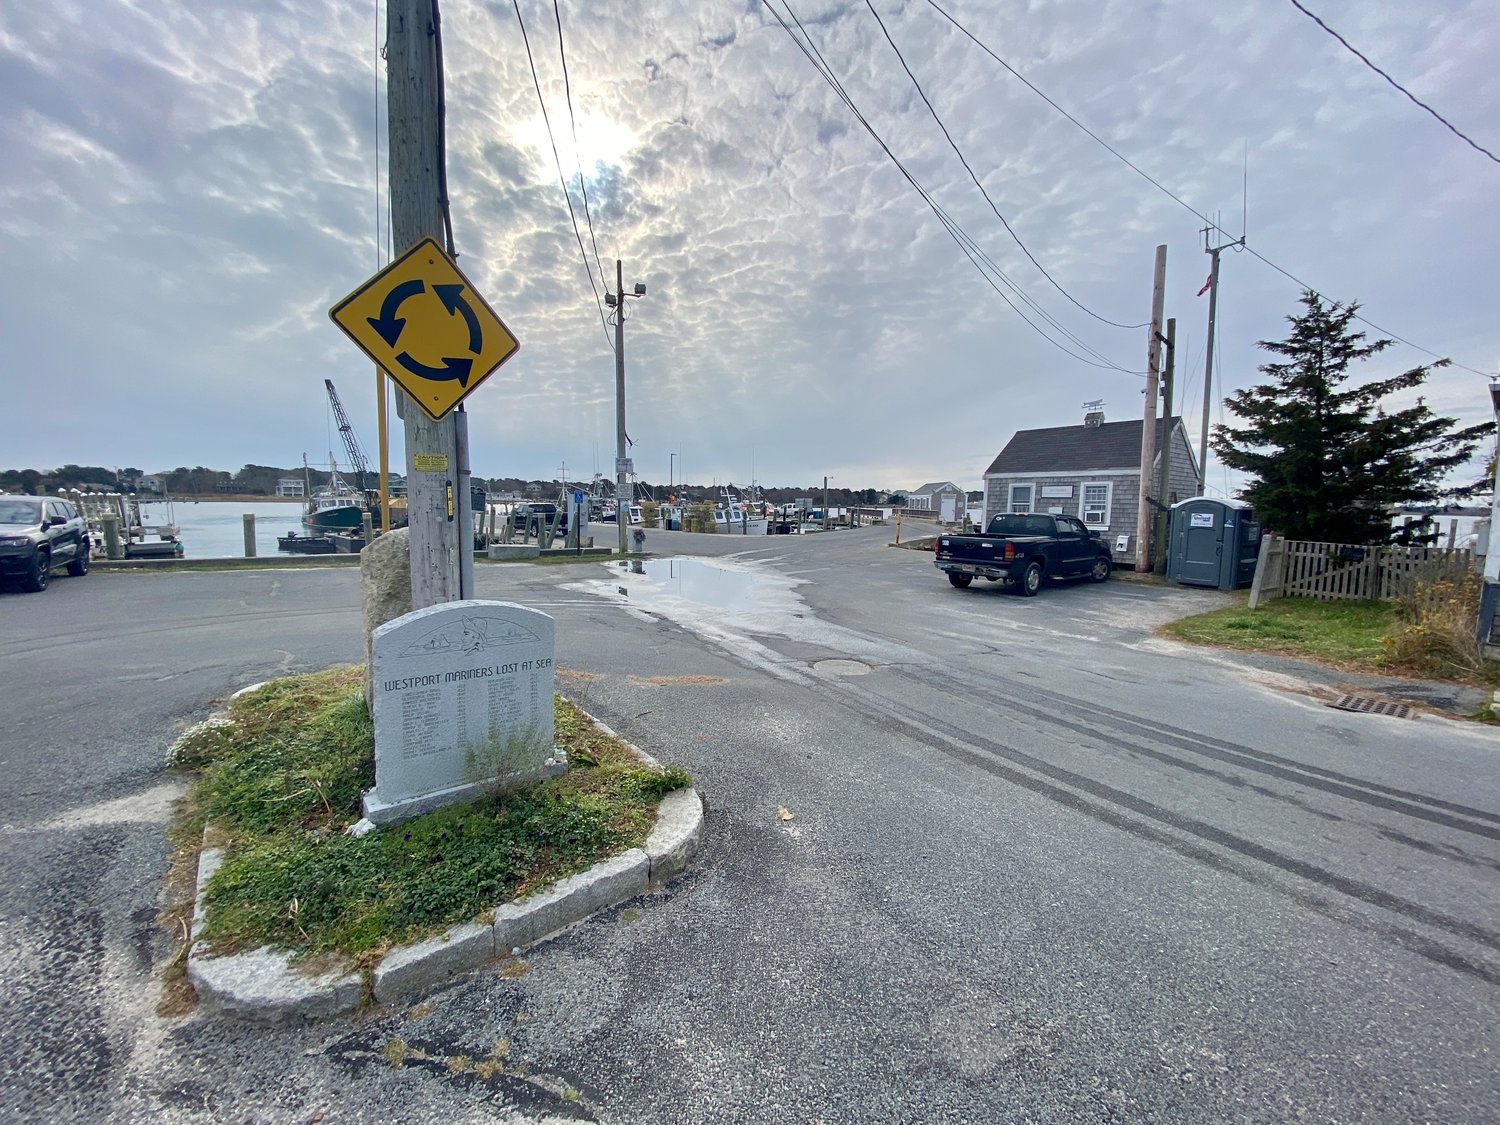 The cul de sac at the end of Main Road at Westport Point will see limited work, providing the funds can be found.